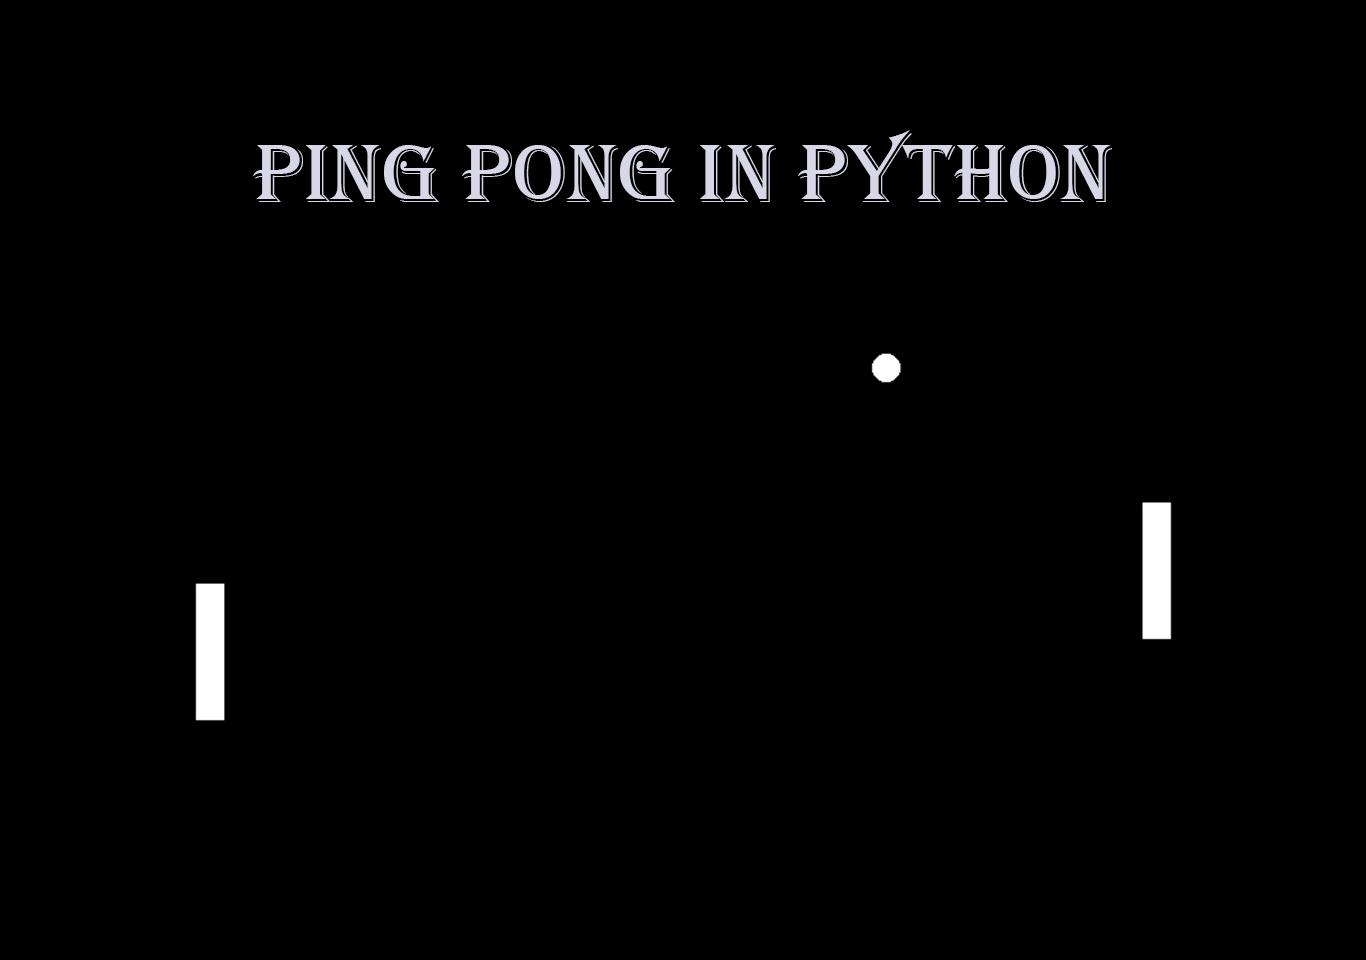 Ping pong in python with source code